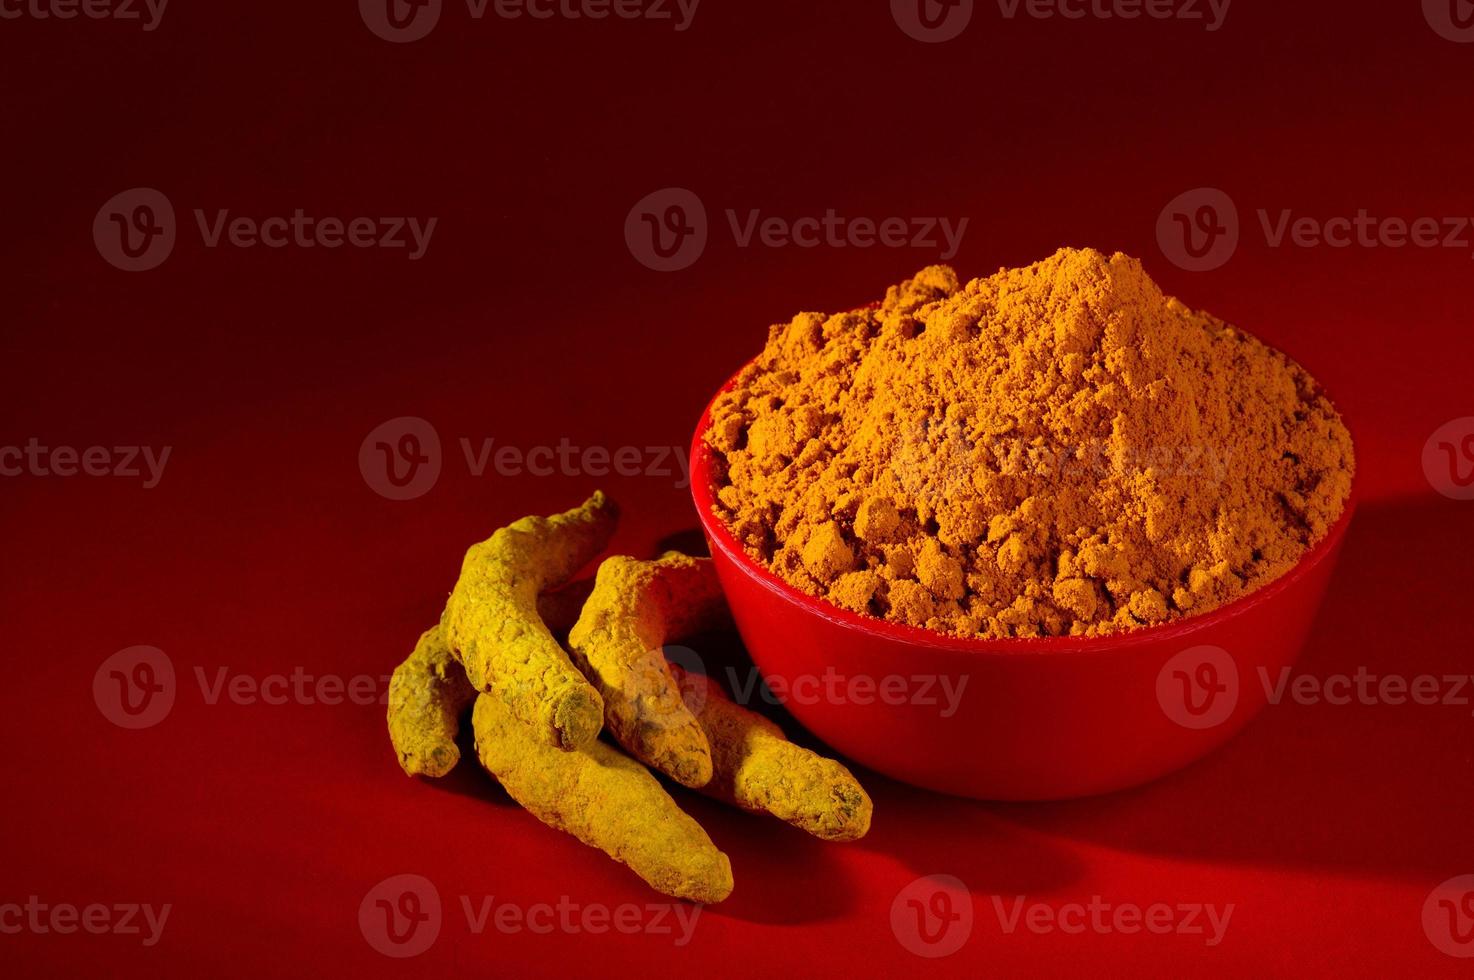 Dry Turmeric powder and roots or barks in red bowl on red background photo